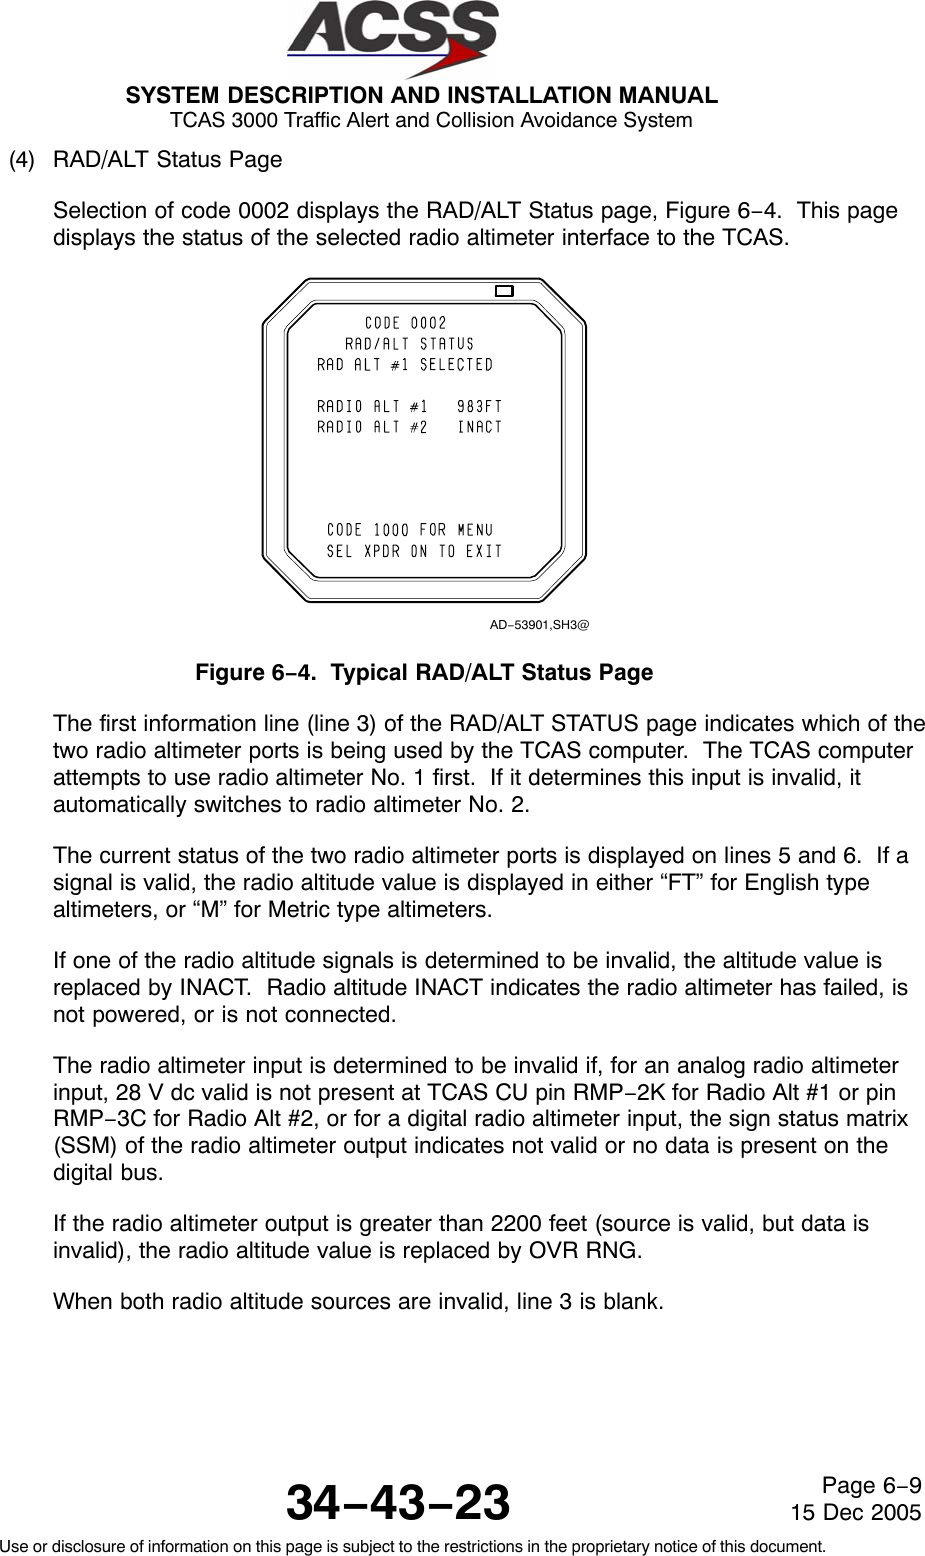 SYSTEM DESCRIPTION AND INSTALLATION MANUAL TCAS 3000 Traffic Alert and Collision Avoidance System34−43−23Use or disclosure of information on this page is subject to the restrictions in the proprietary notice of this document.Page 6−915 Dec 2005(4) RAD/ALT Status PageSelection of code 0002 displays the RAD/ALT Status page, Figure 6−4.  This pagedisplays the status of the selected radio altimeter interface to the TCAS.AD−53901,SH3@Figure 6−4.  Typical RAD/ALT Status PageThe first information line (line 3) of the RAD/ALT STATUS page indicates which of thetwo radio altimeter ports is being used by the TCAS computer.  The TCAS computerattempts to use radio altimeter No. 1 first.  If it determines this input is invalid, itautomatically switches to radio altimeter No. 2.The current status of the two radio altimeter ports is displayed on lines 5 and 6.  If asignal is valid, the radio altitude value is displayed in either “FT” for English typealtimeters, or “M” for Metric type altimeters.If one of the radio altitude signals is determined to be invalid, the altitude value isreplaced by INACT.  Radio altitude INACT indicates the radio altimeter has failed, isnot powered, or is not connected.The radio altimeter input is determined to be invalid if, for an analog radio altimeterinput, 28 V dc valid is not present at TCAS CU pin RMP−2K for Radio Alt #1 or pinRMP−3C for Radio Alt #2, or for a digital radio altimeter input, the sign status matrix(SSM) of the radio altimeter output indicates not valid or no data is present on thedigital bus.If the radio altimeter output is greater than 2200 feet (source is valid, but data isinvalid), the radio altitude value is replaced by OVR RNG.When both radio altitude sources are invalid, line 3 is blank.